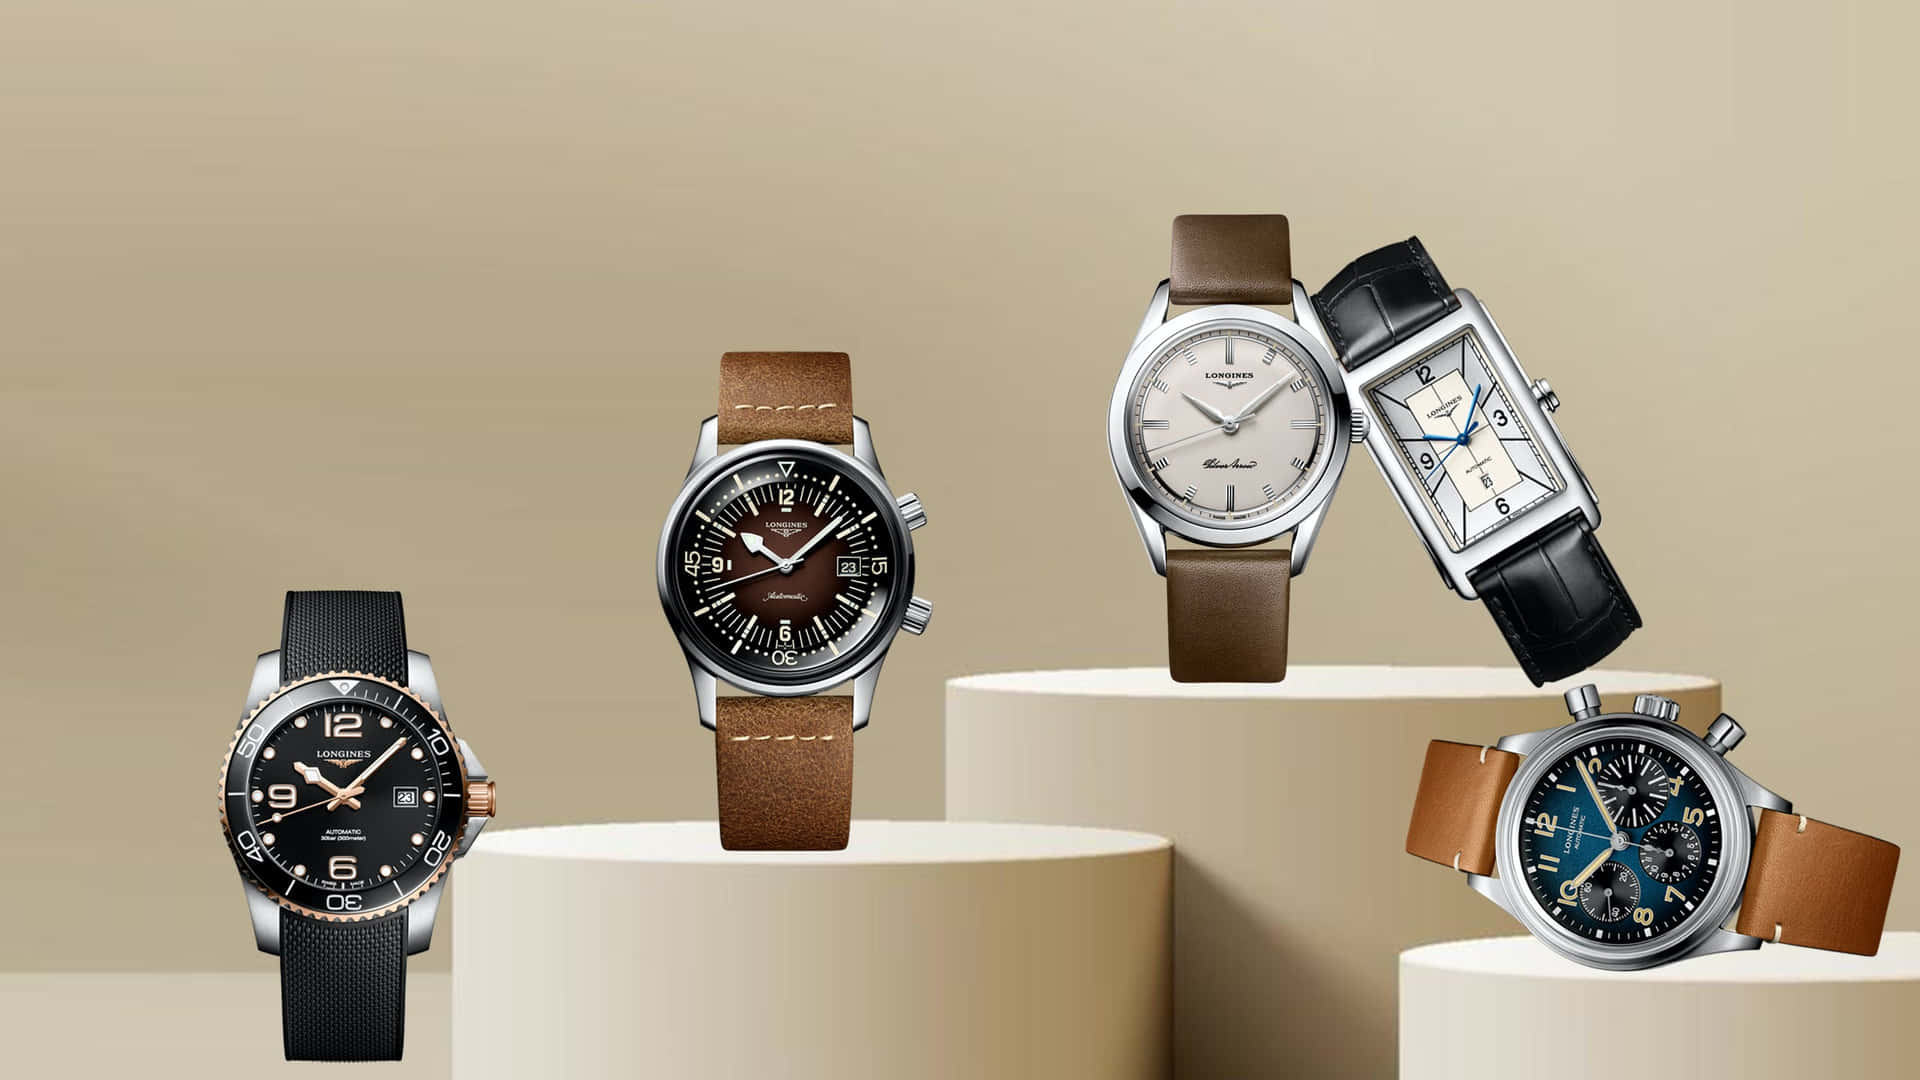 Caption: Elegant Collection of Longines Watches Wallpaper